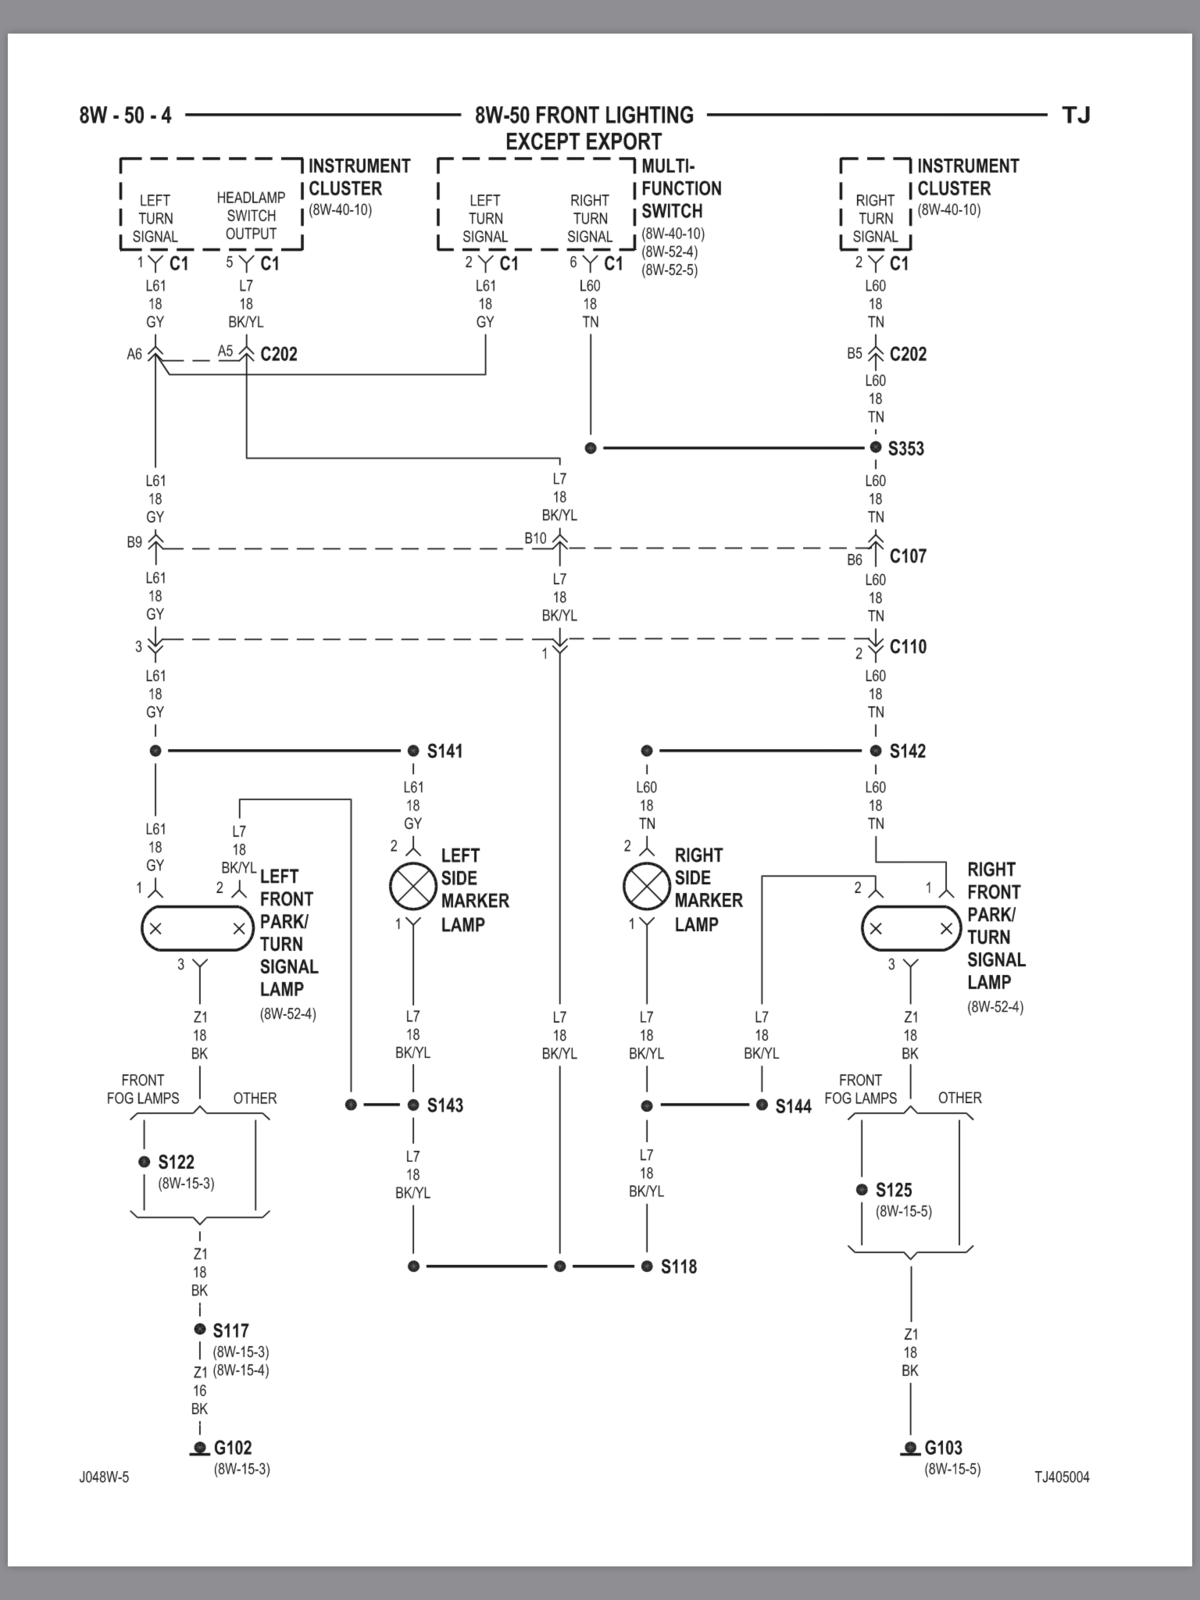 Wiring Guide or Diagram | Jeep Wrangler TJ Forum Jeep Wrangler Fuse Box Jeep Wrangler TJ Forum